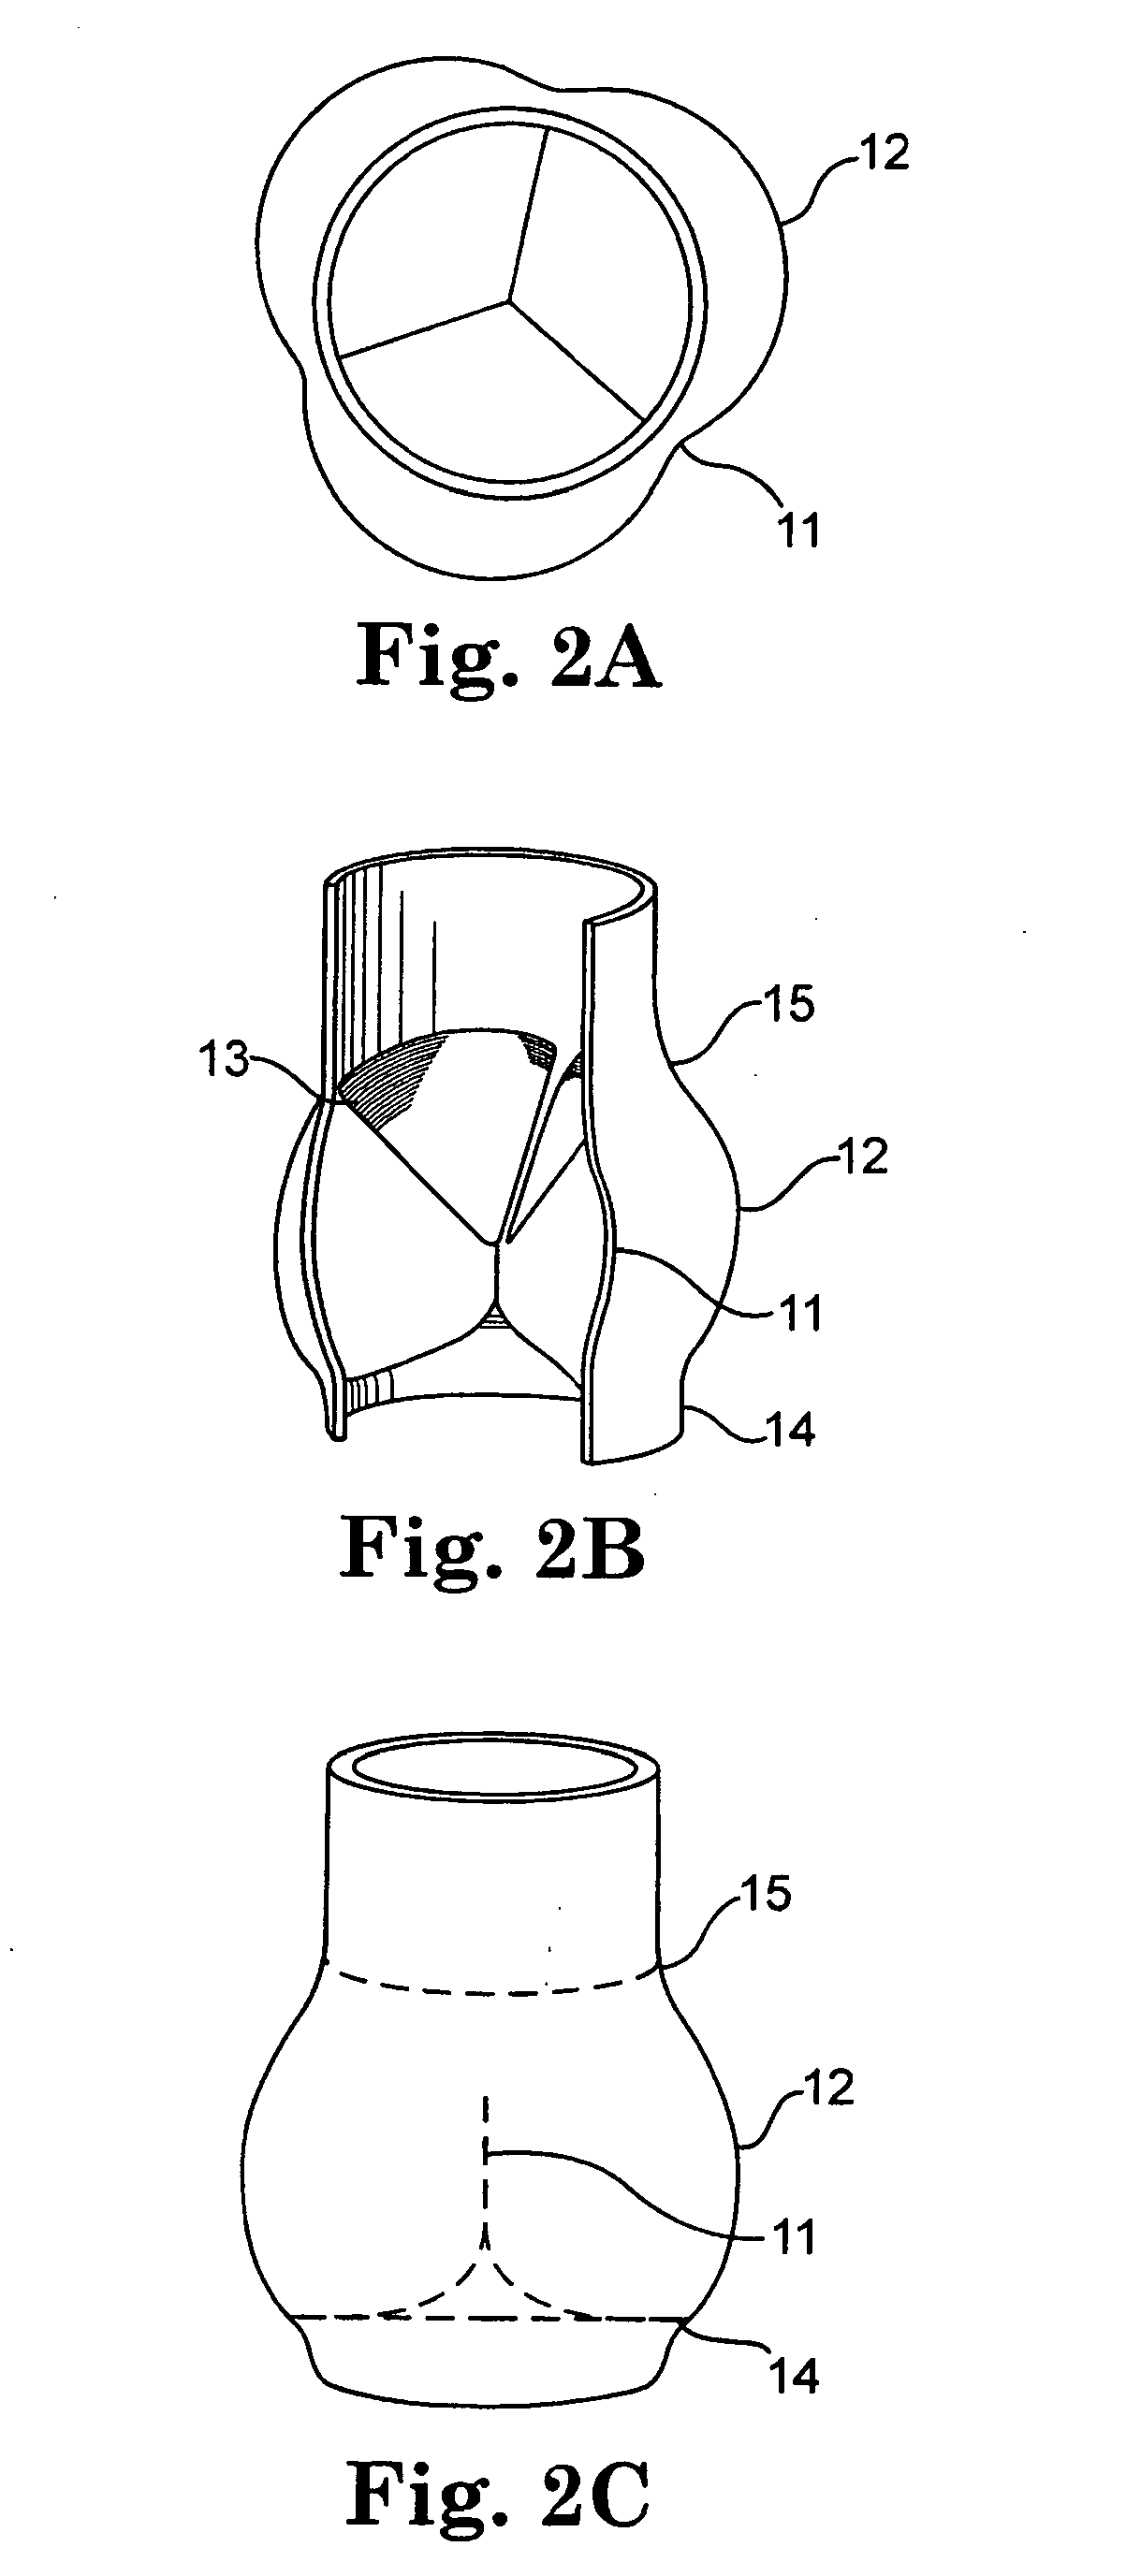 Methods and systems for reducing paravalvular leakage in heart valves